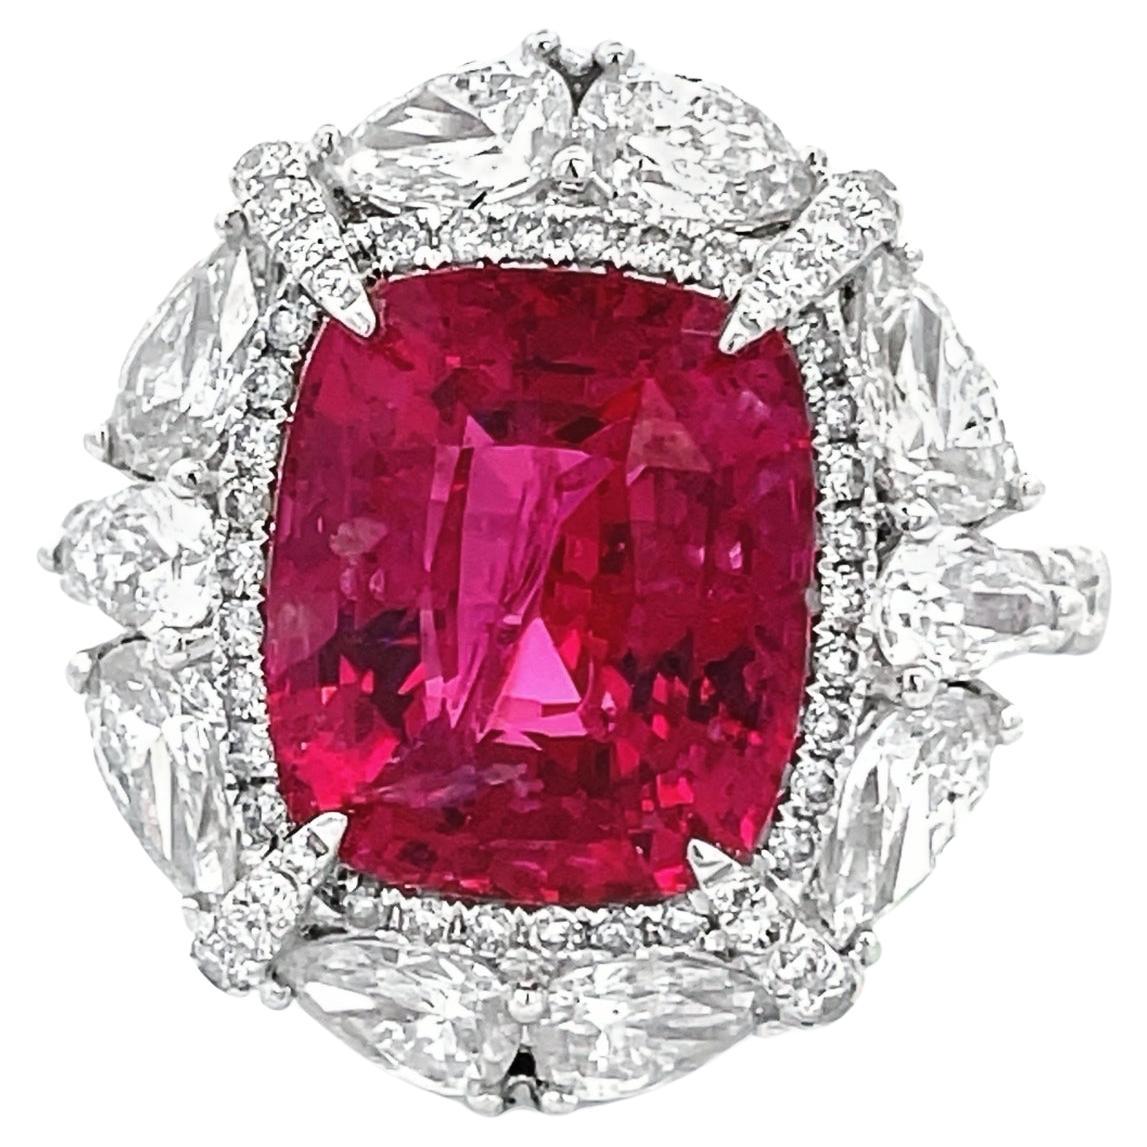 AGL Certified PINK SAPPHIRE CUS 6.07 CT. WHITE DIA (MIX SHAPE) 2.23CT 18KW RING For Sale